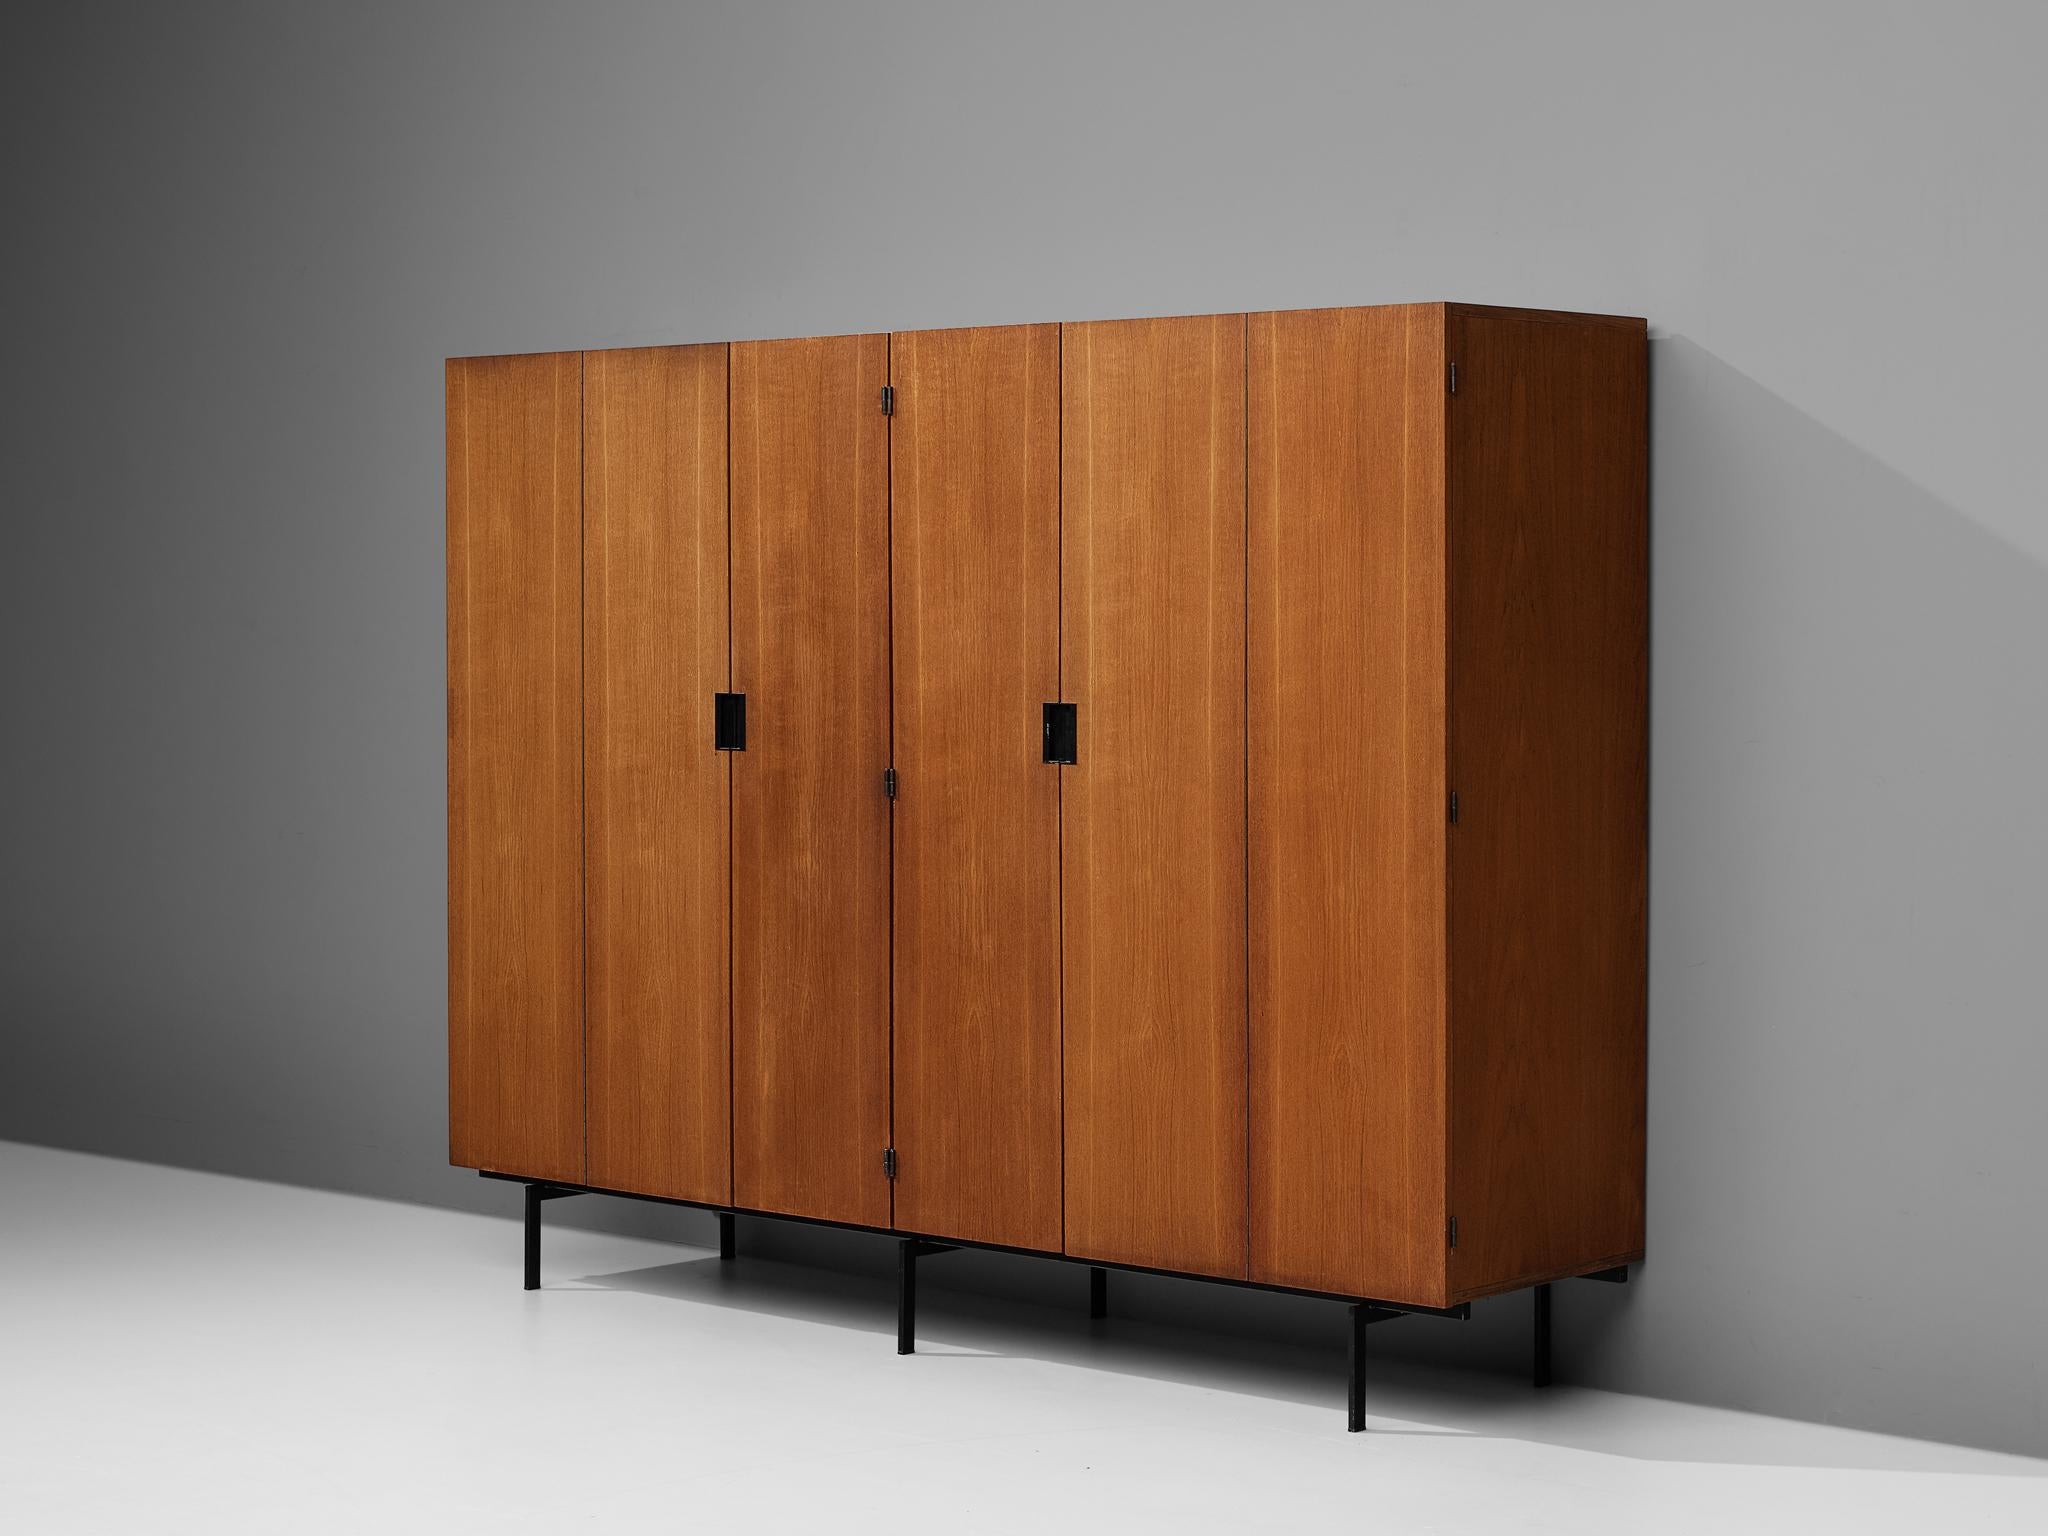 Cees Braakman for Pastoe, large wardrobe, teak, metal, the Netherlands, 1950s

On a slim black metal base rests this large wardrobe by Cees Braakman for Pastoe. Six doors, either bi-folded or single, access the inside which is structured with